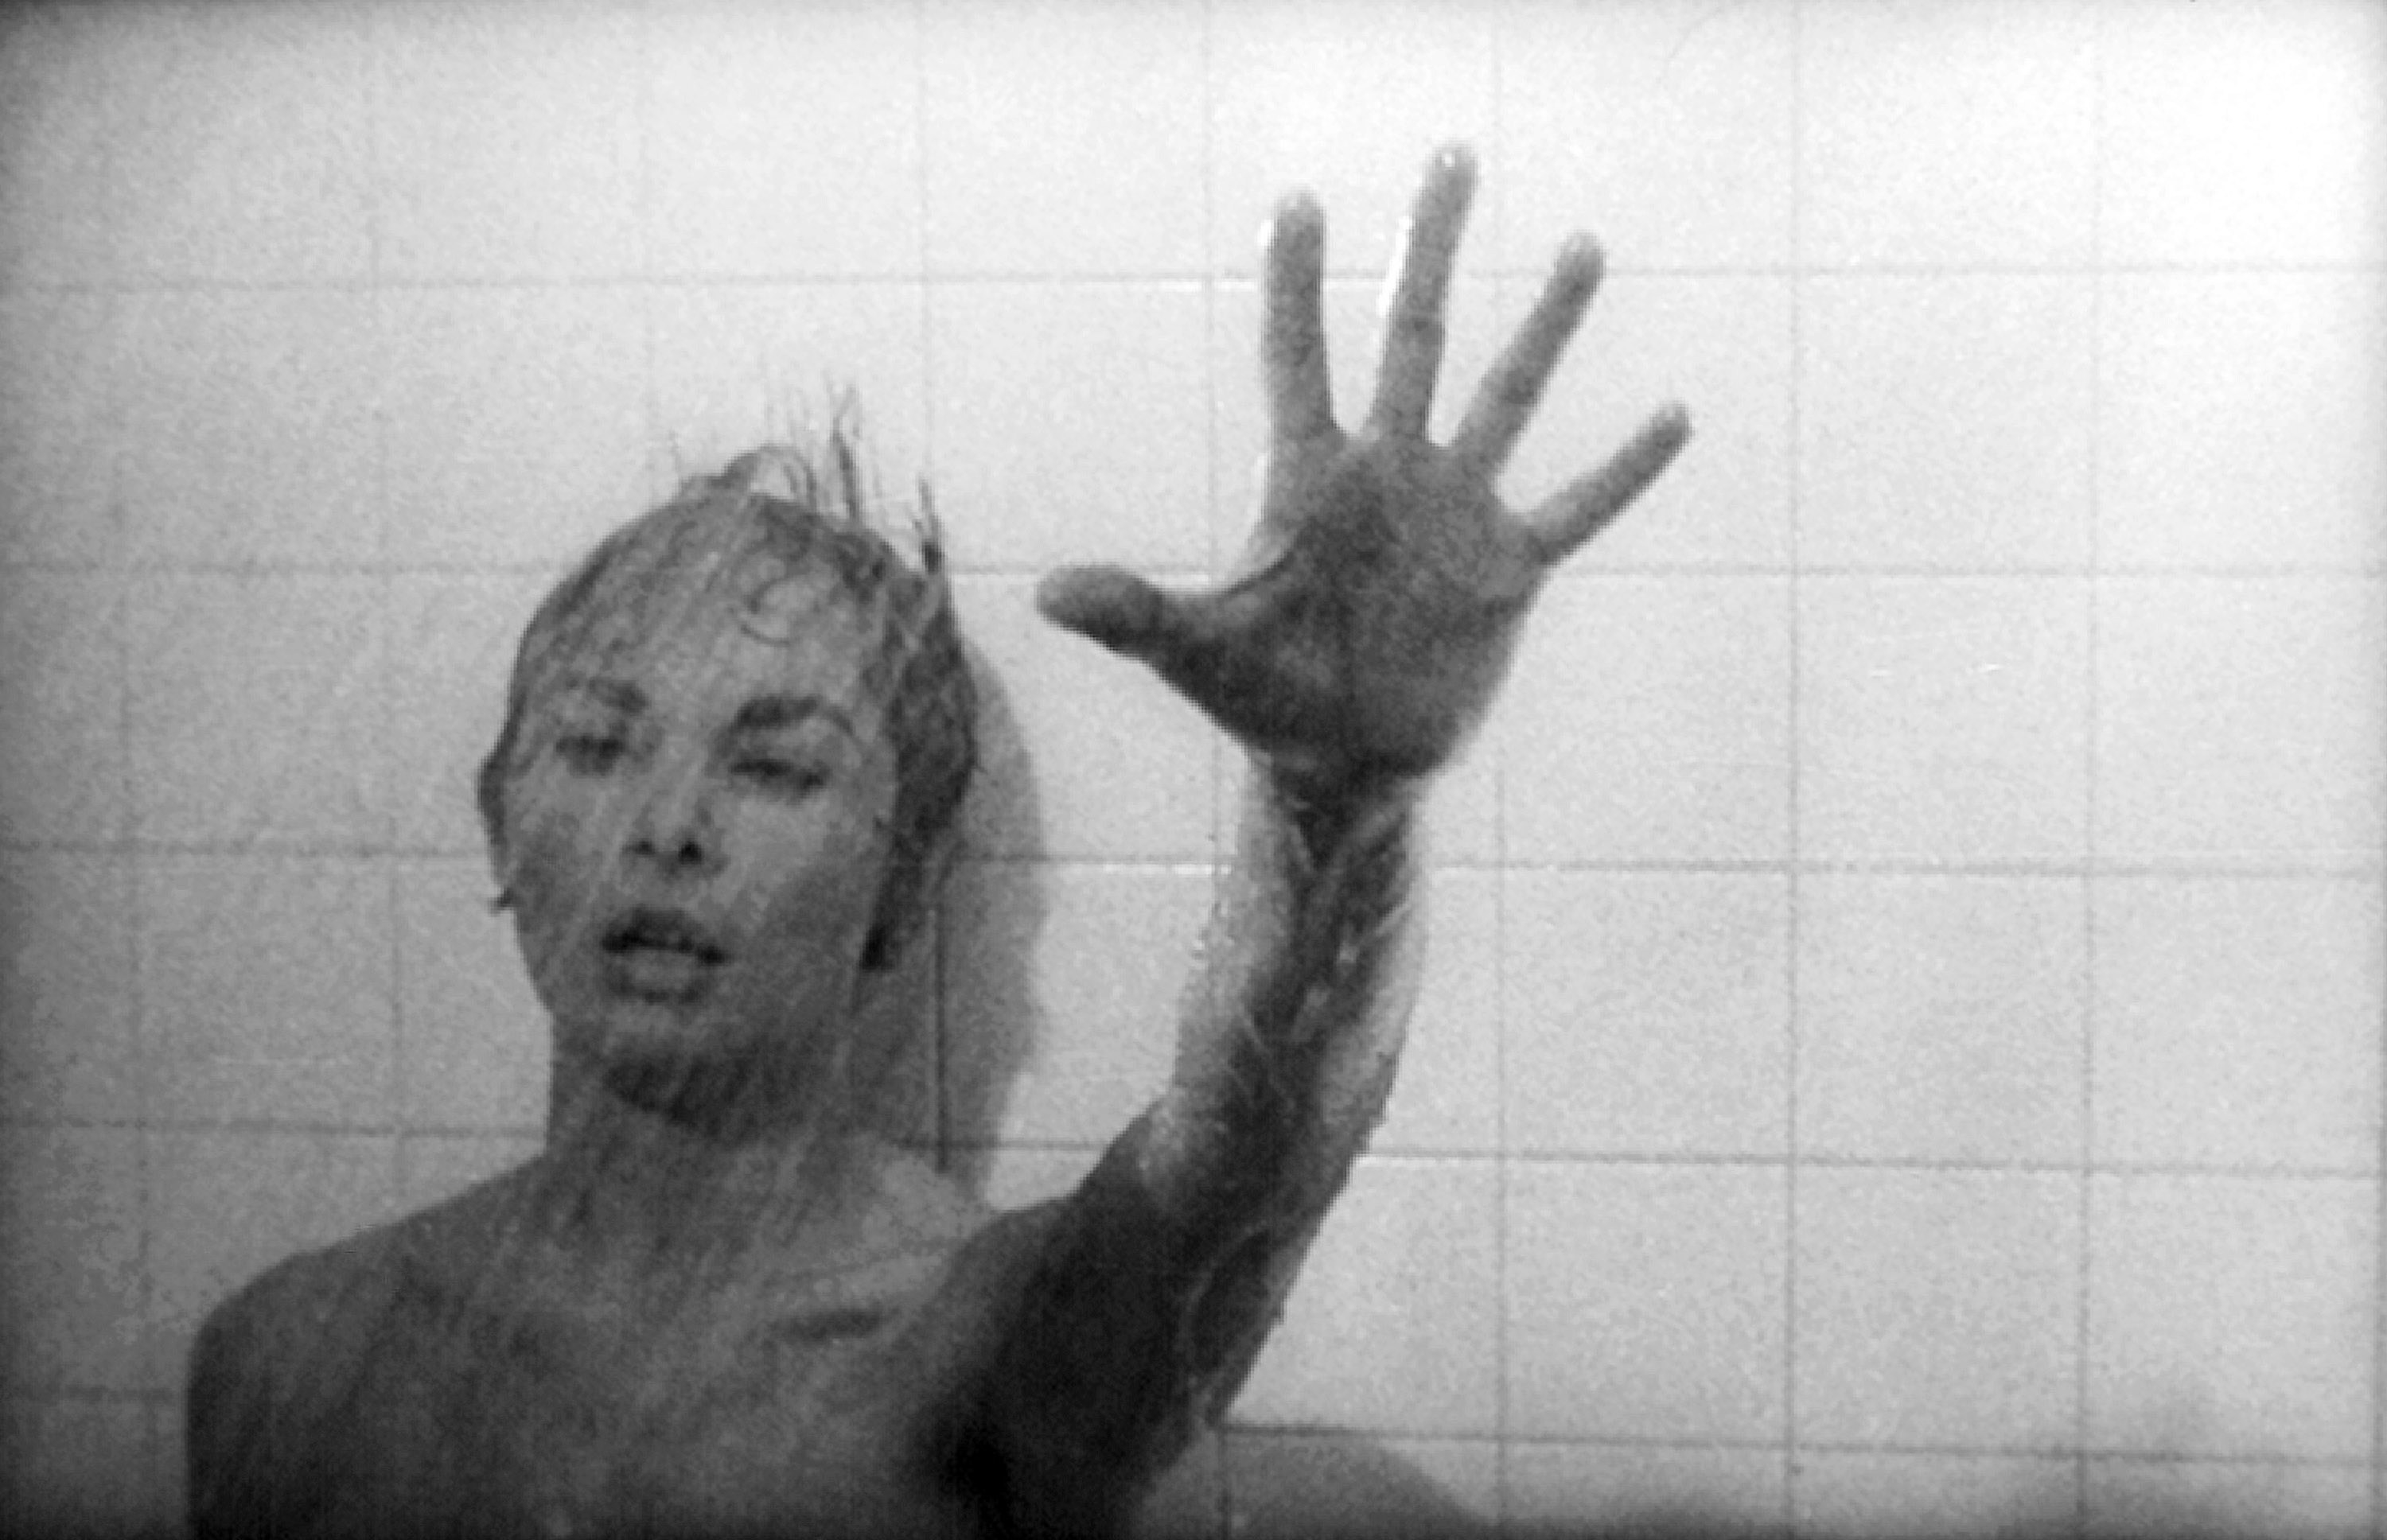 Leigh as Marion in the shower dying